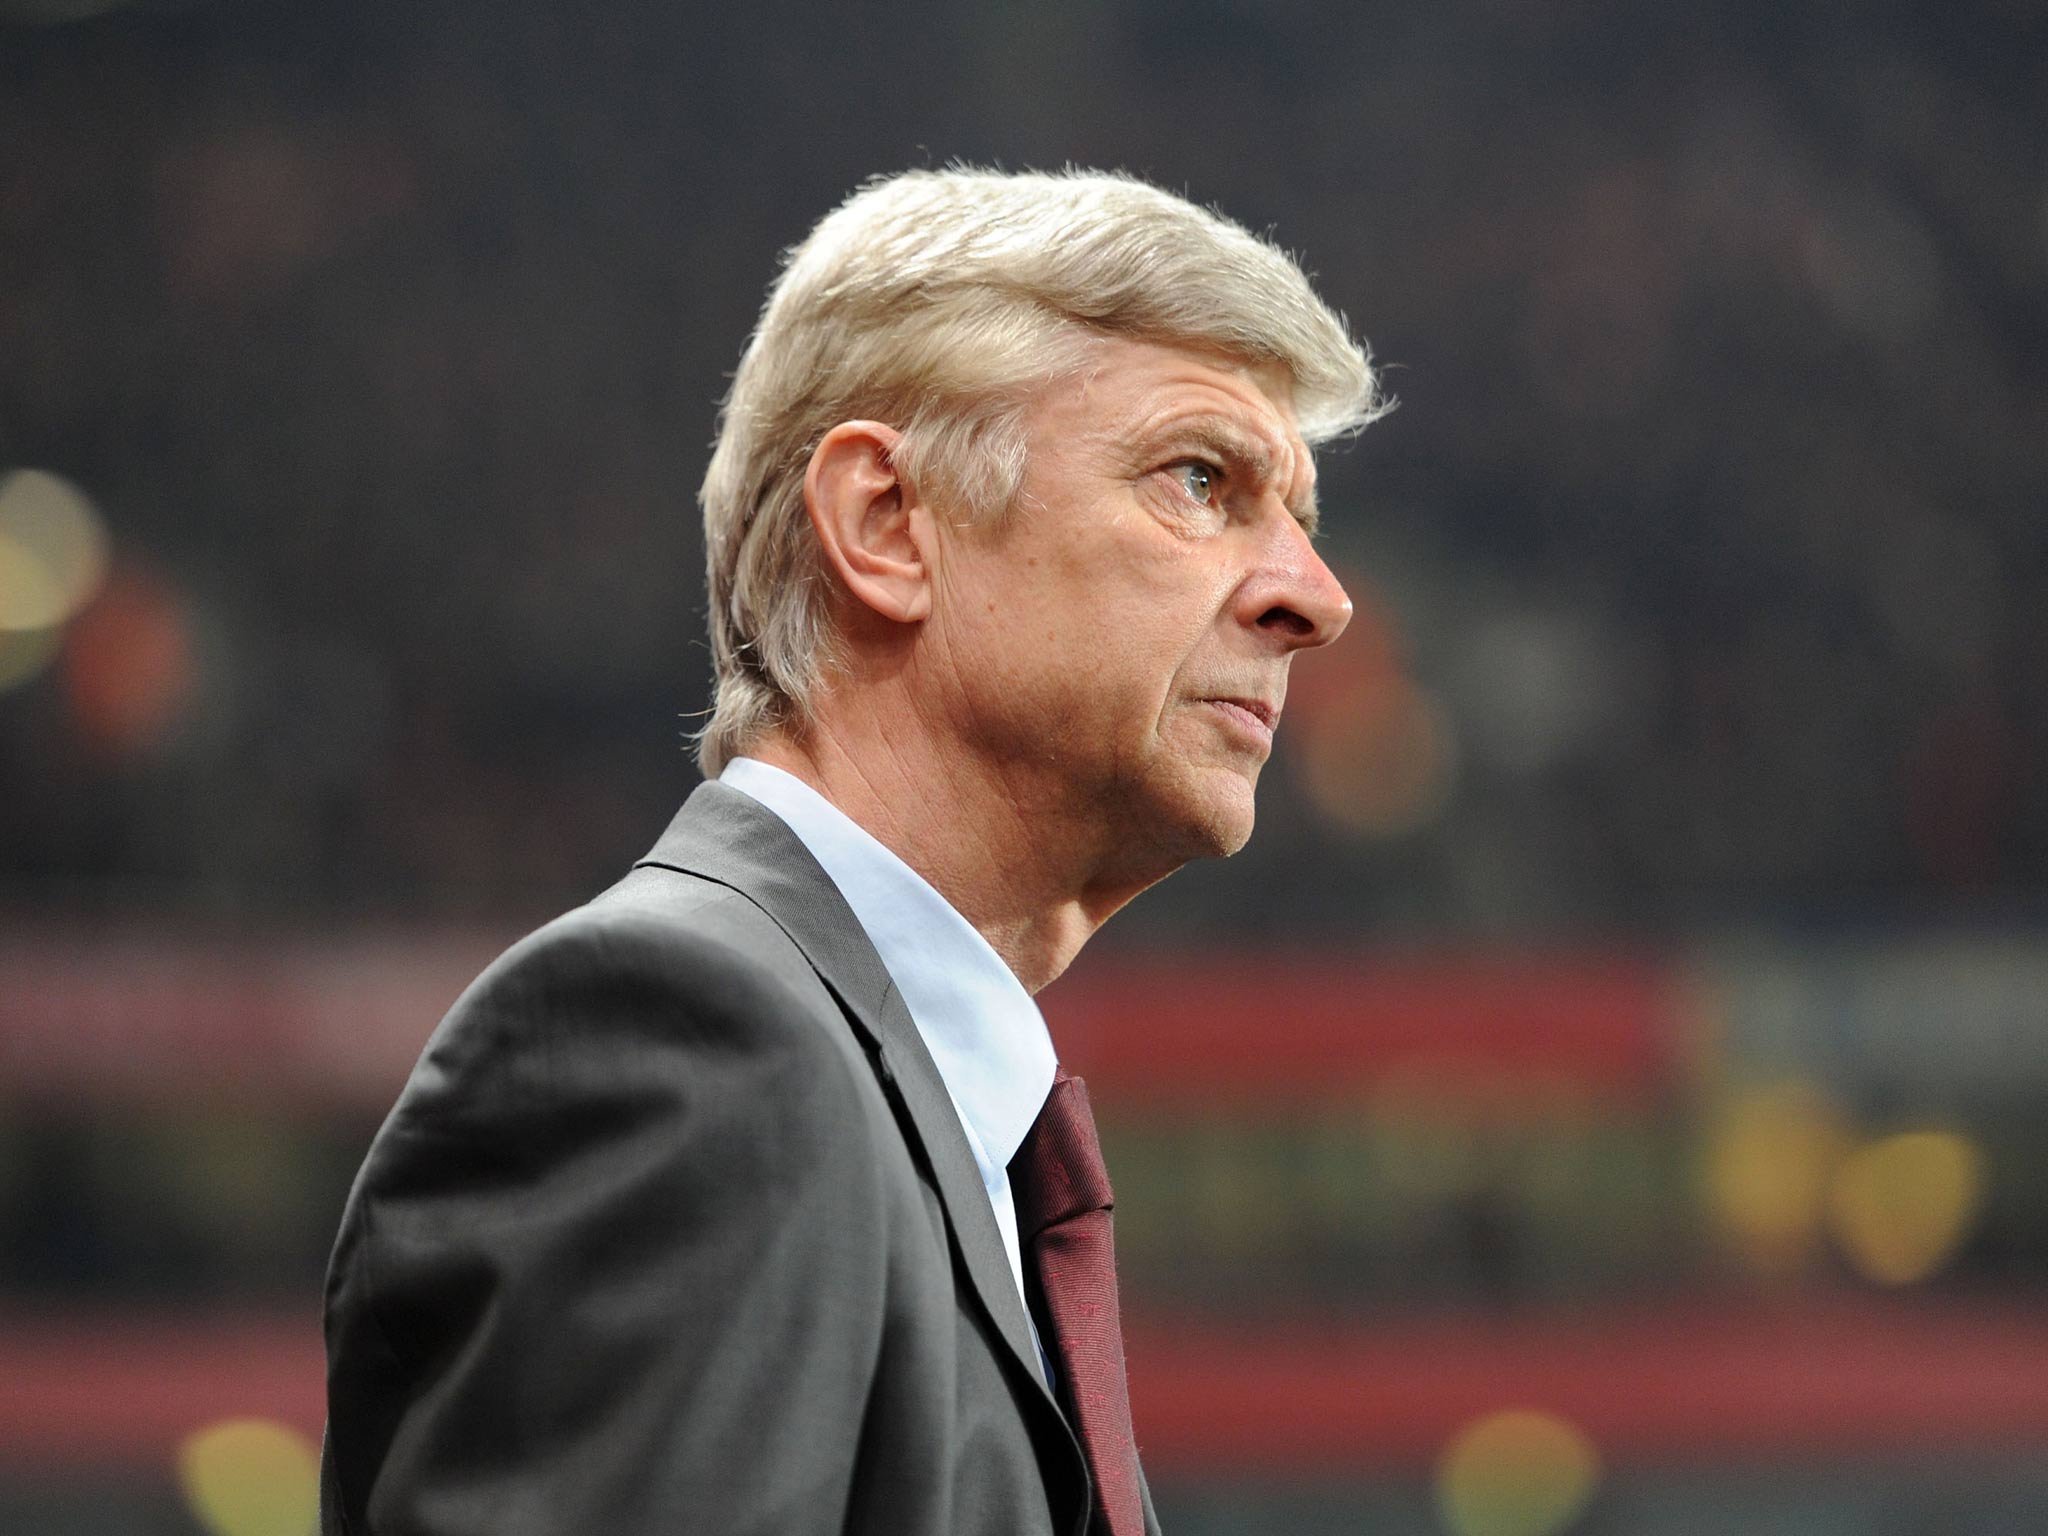 Arsene Wenger looks on during Arsenal's defeat to Bayern Munich in the Champions League